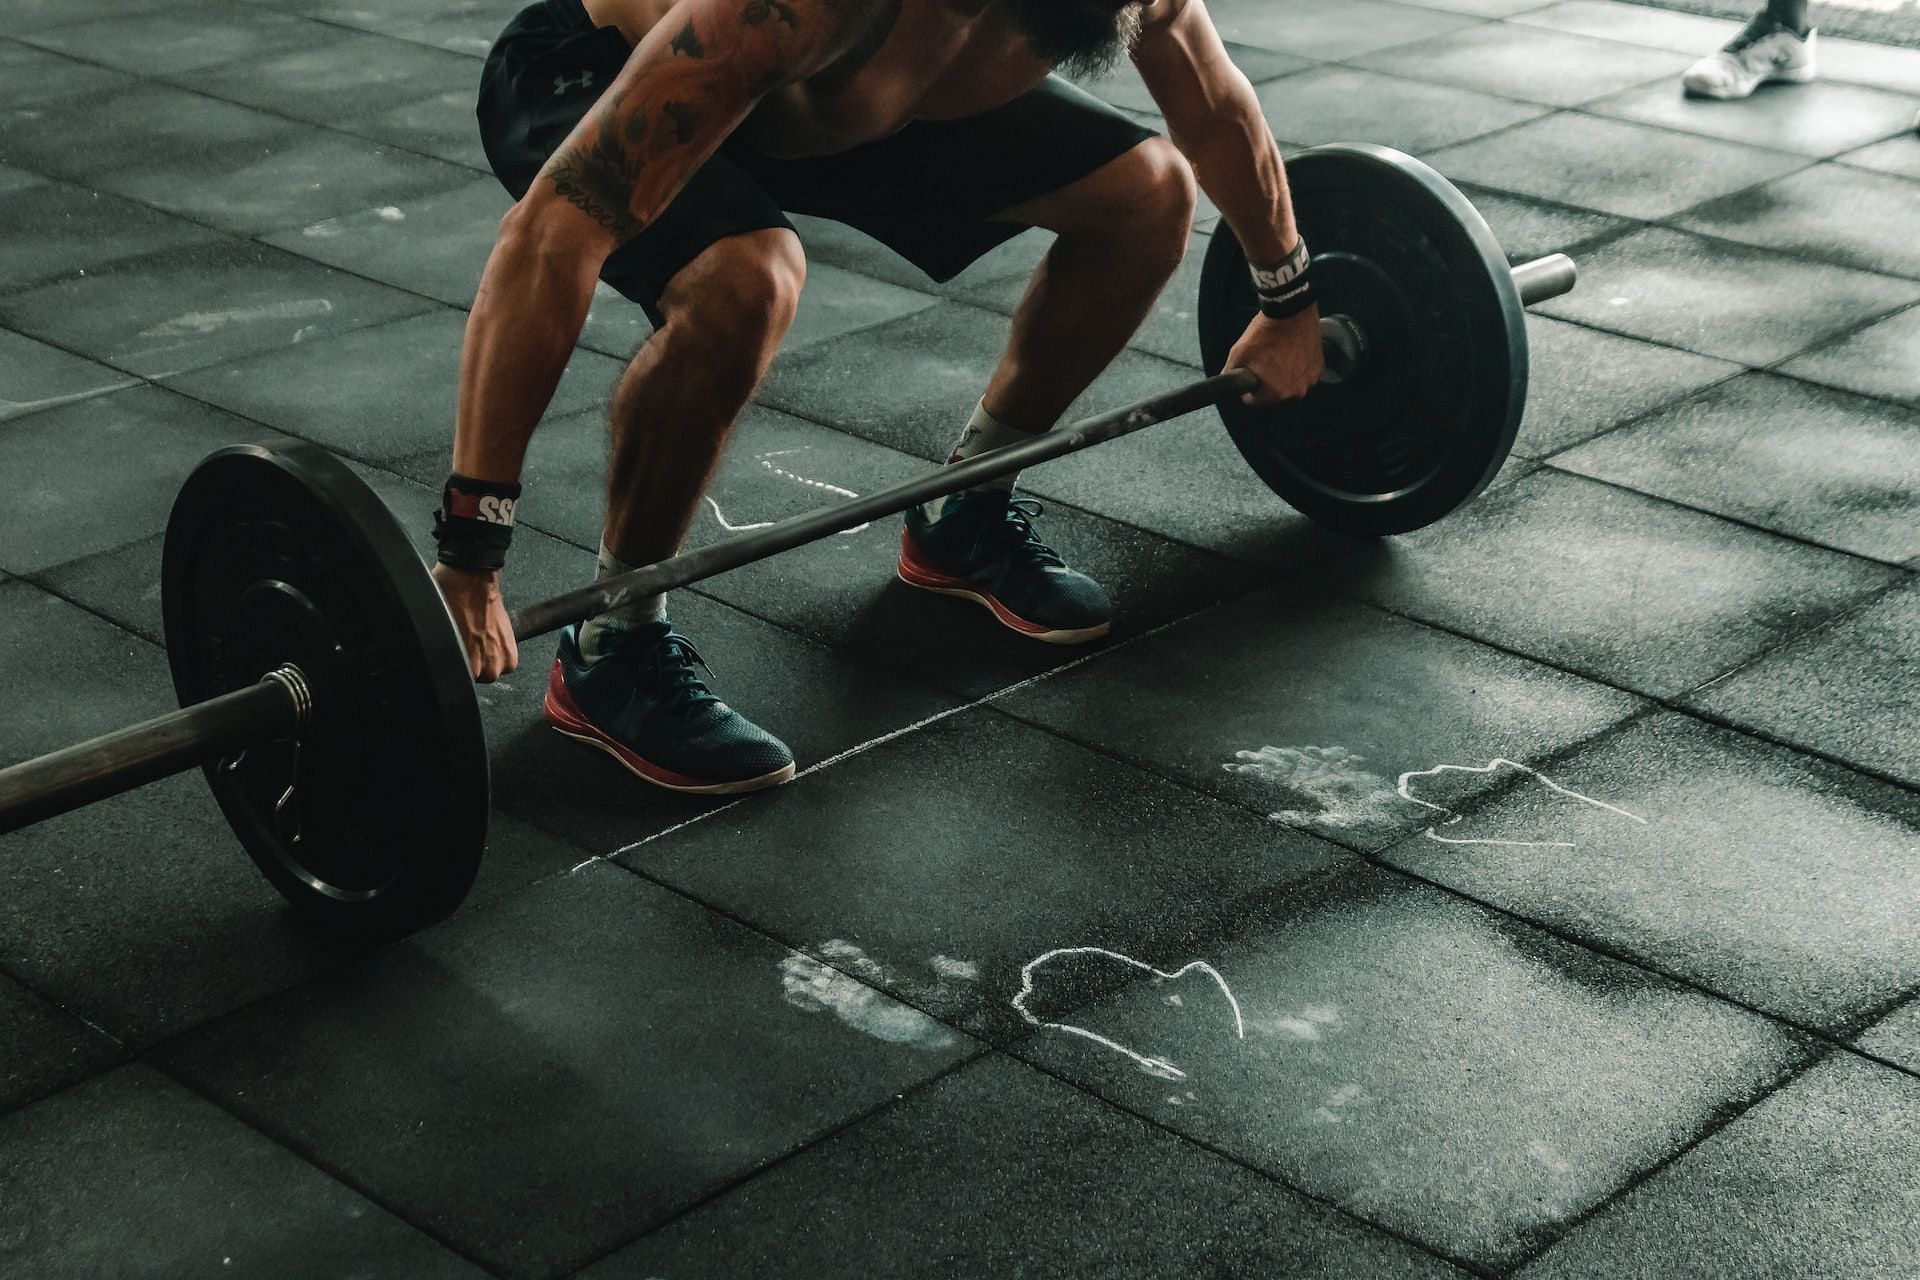 Certain exercises particularly target the front deltoid muscles. (Photo via Pexels/Victor Freitas)